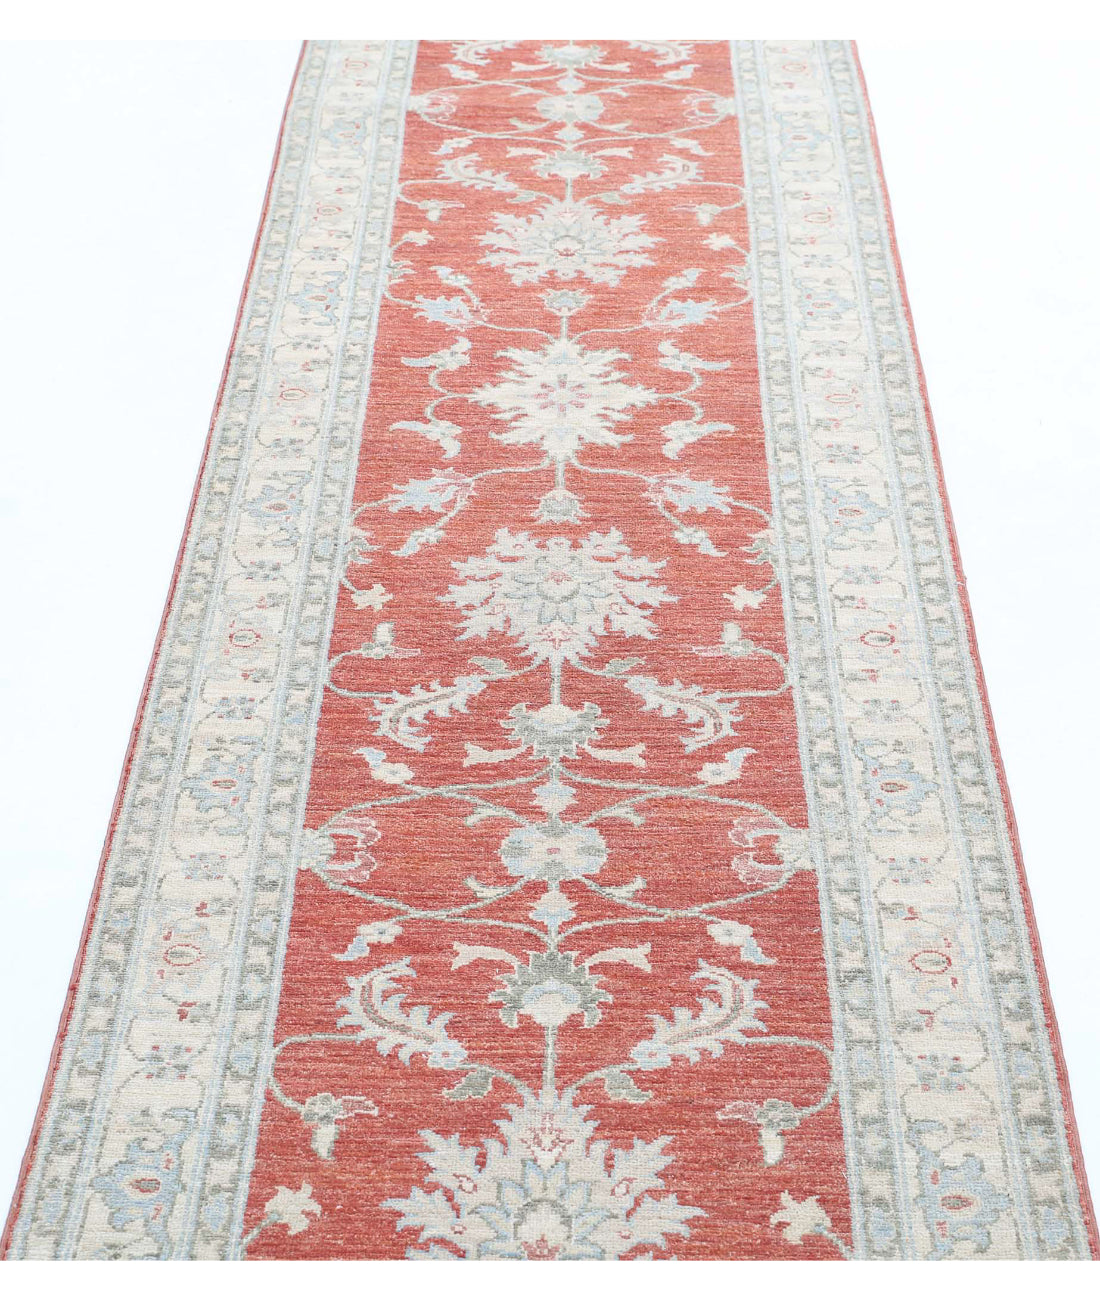 Ziegler 2'8'' X 9'7'' Hand-Knotted Wool Rug 2'8'' x 9'7'' (80 X 288) / Red / Ivory